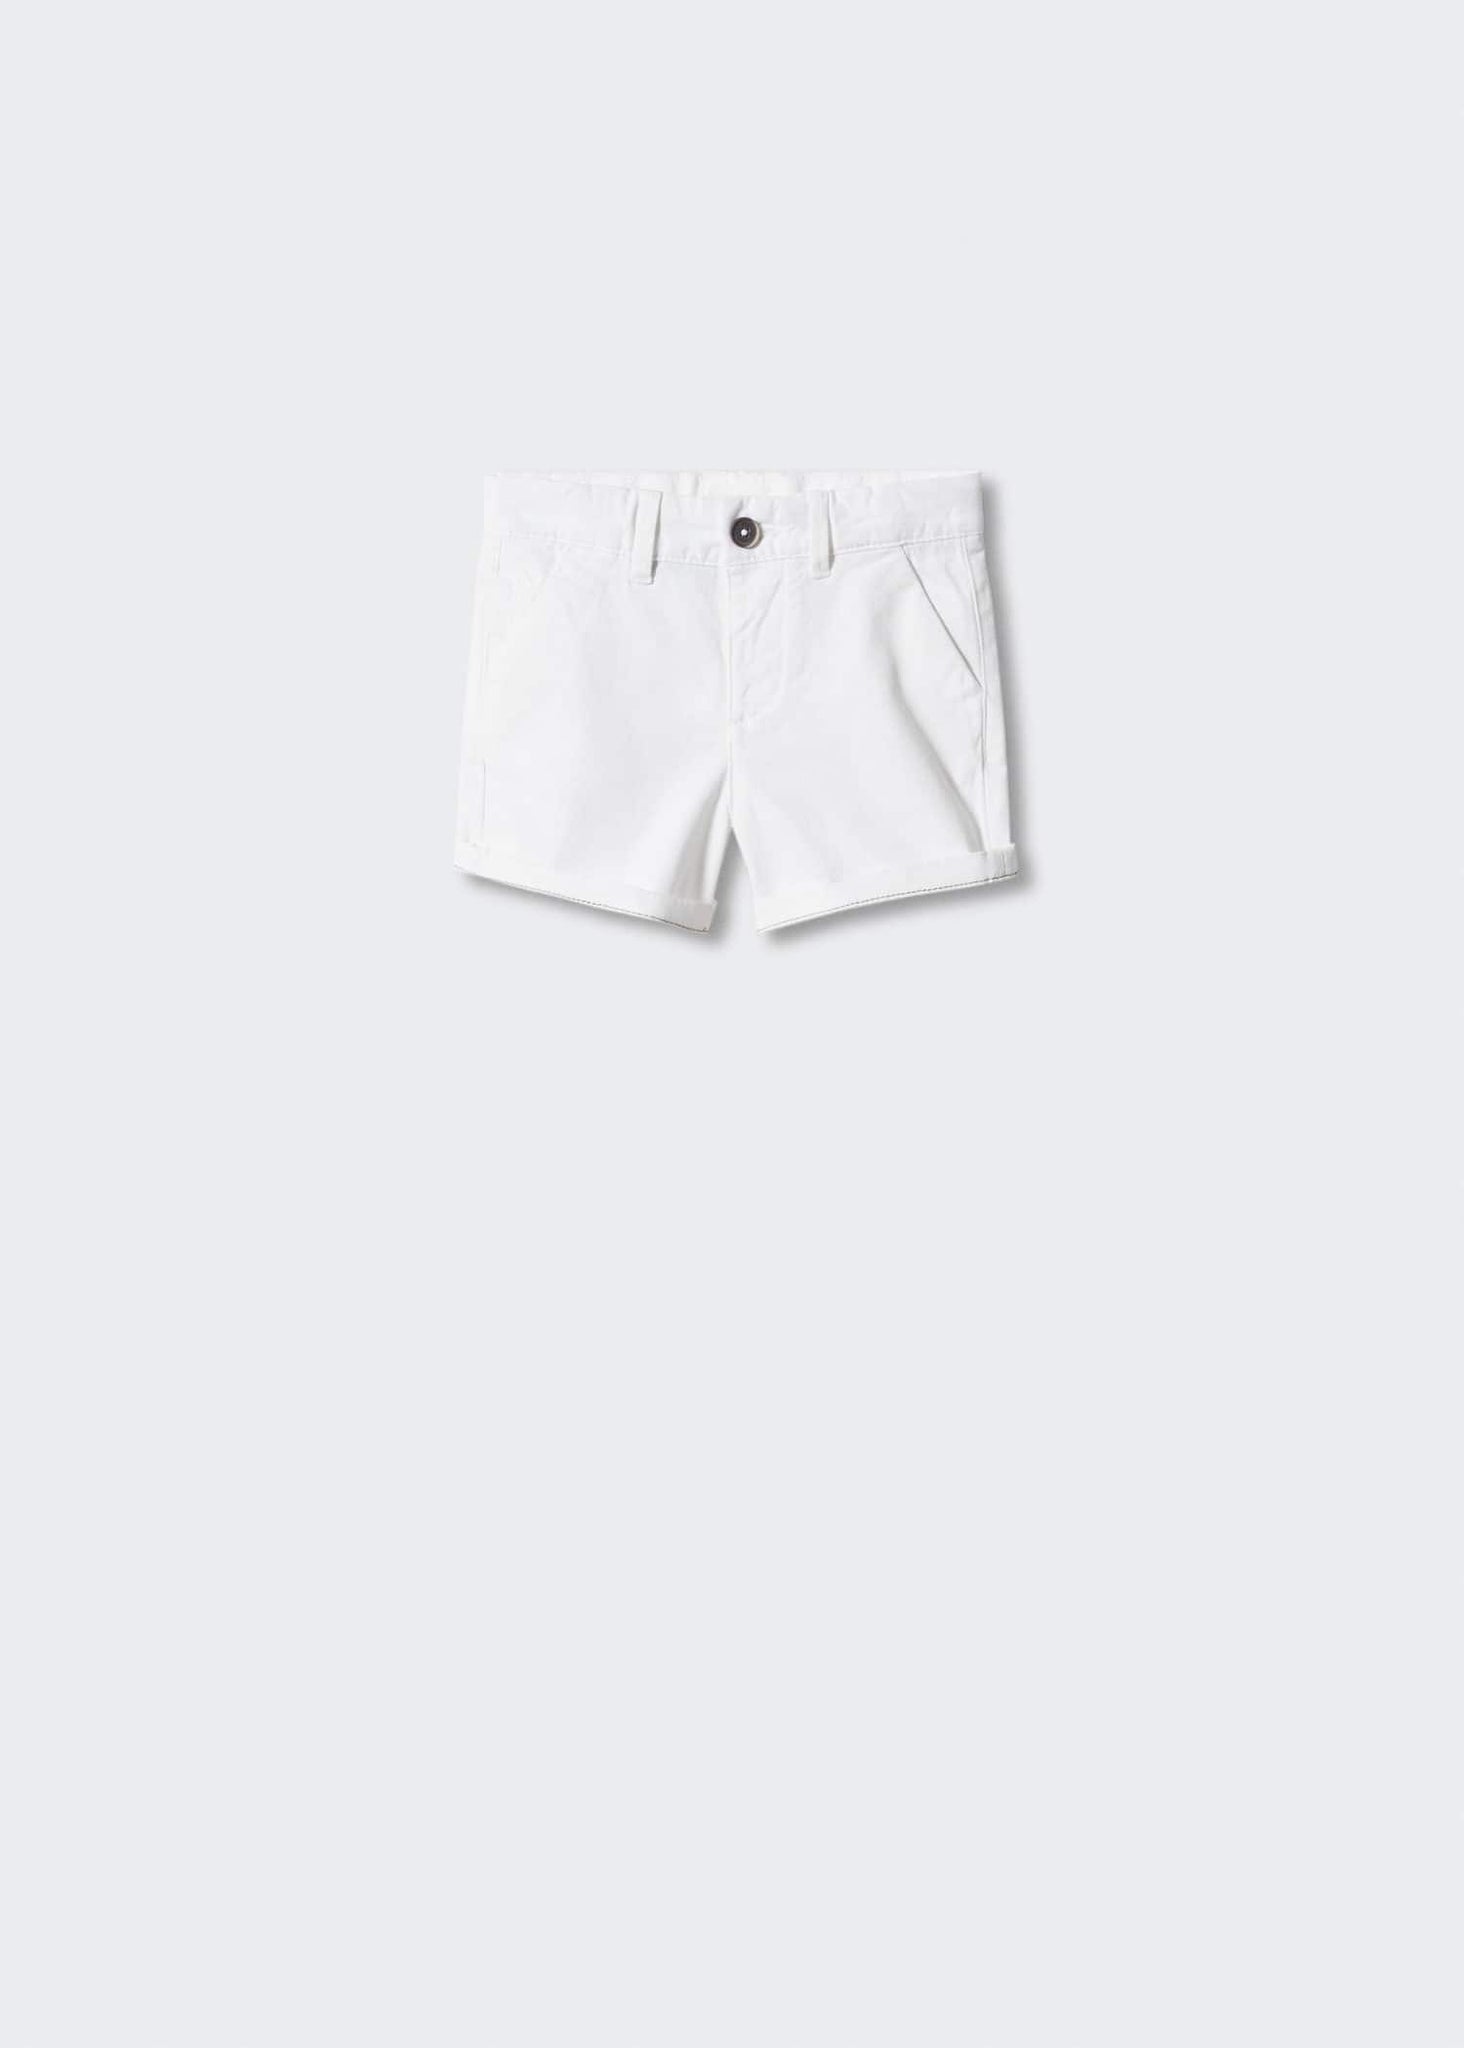 Cotton chino style Bermuda shorts - Article without model